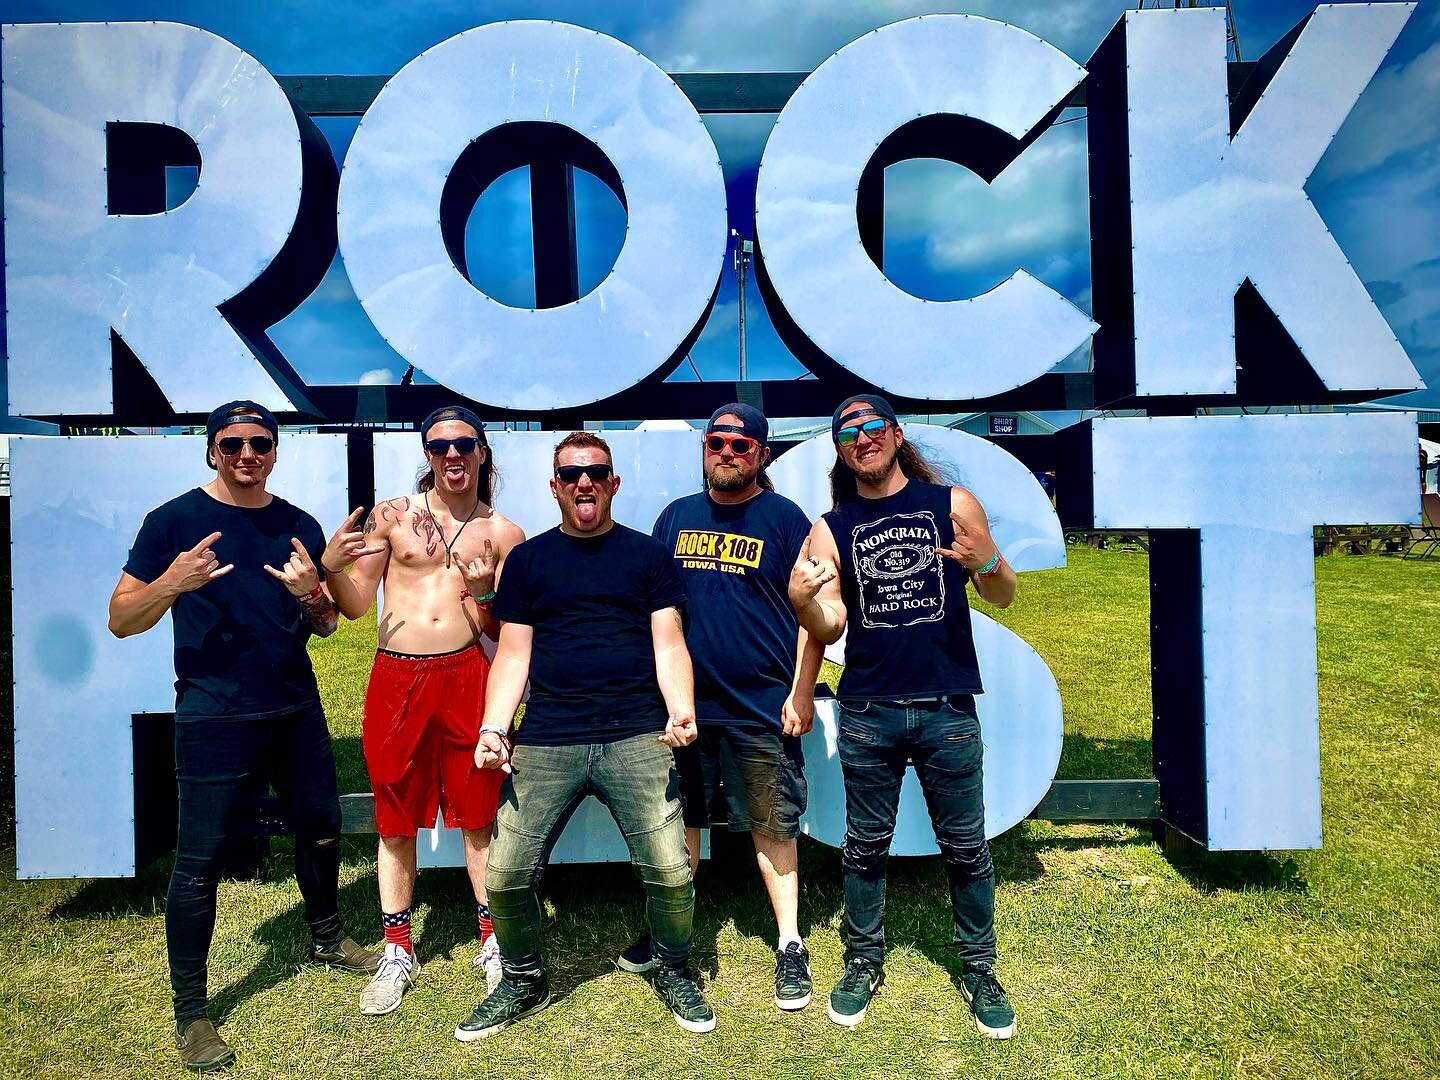 ROCK FEST! We are here and ready to have some FUN! We&rsquo;re hitting the Budweiser&rsquo;s Boneyard stage tonight at 9:50 and again at 12:55!! This is going to get WILD! Don&rsquo;t miss it! 
@rockfestwi #rockfest #wisconsin #letsgo #partytime